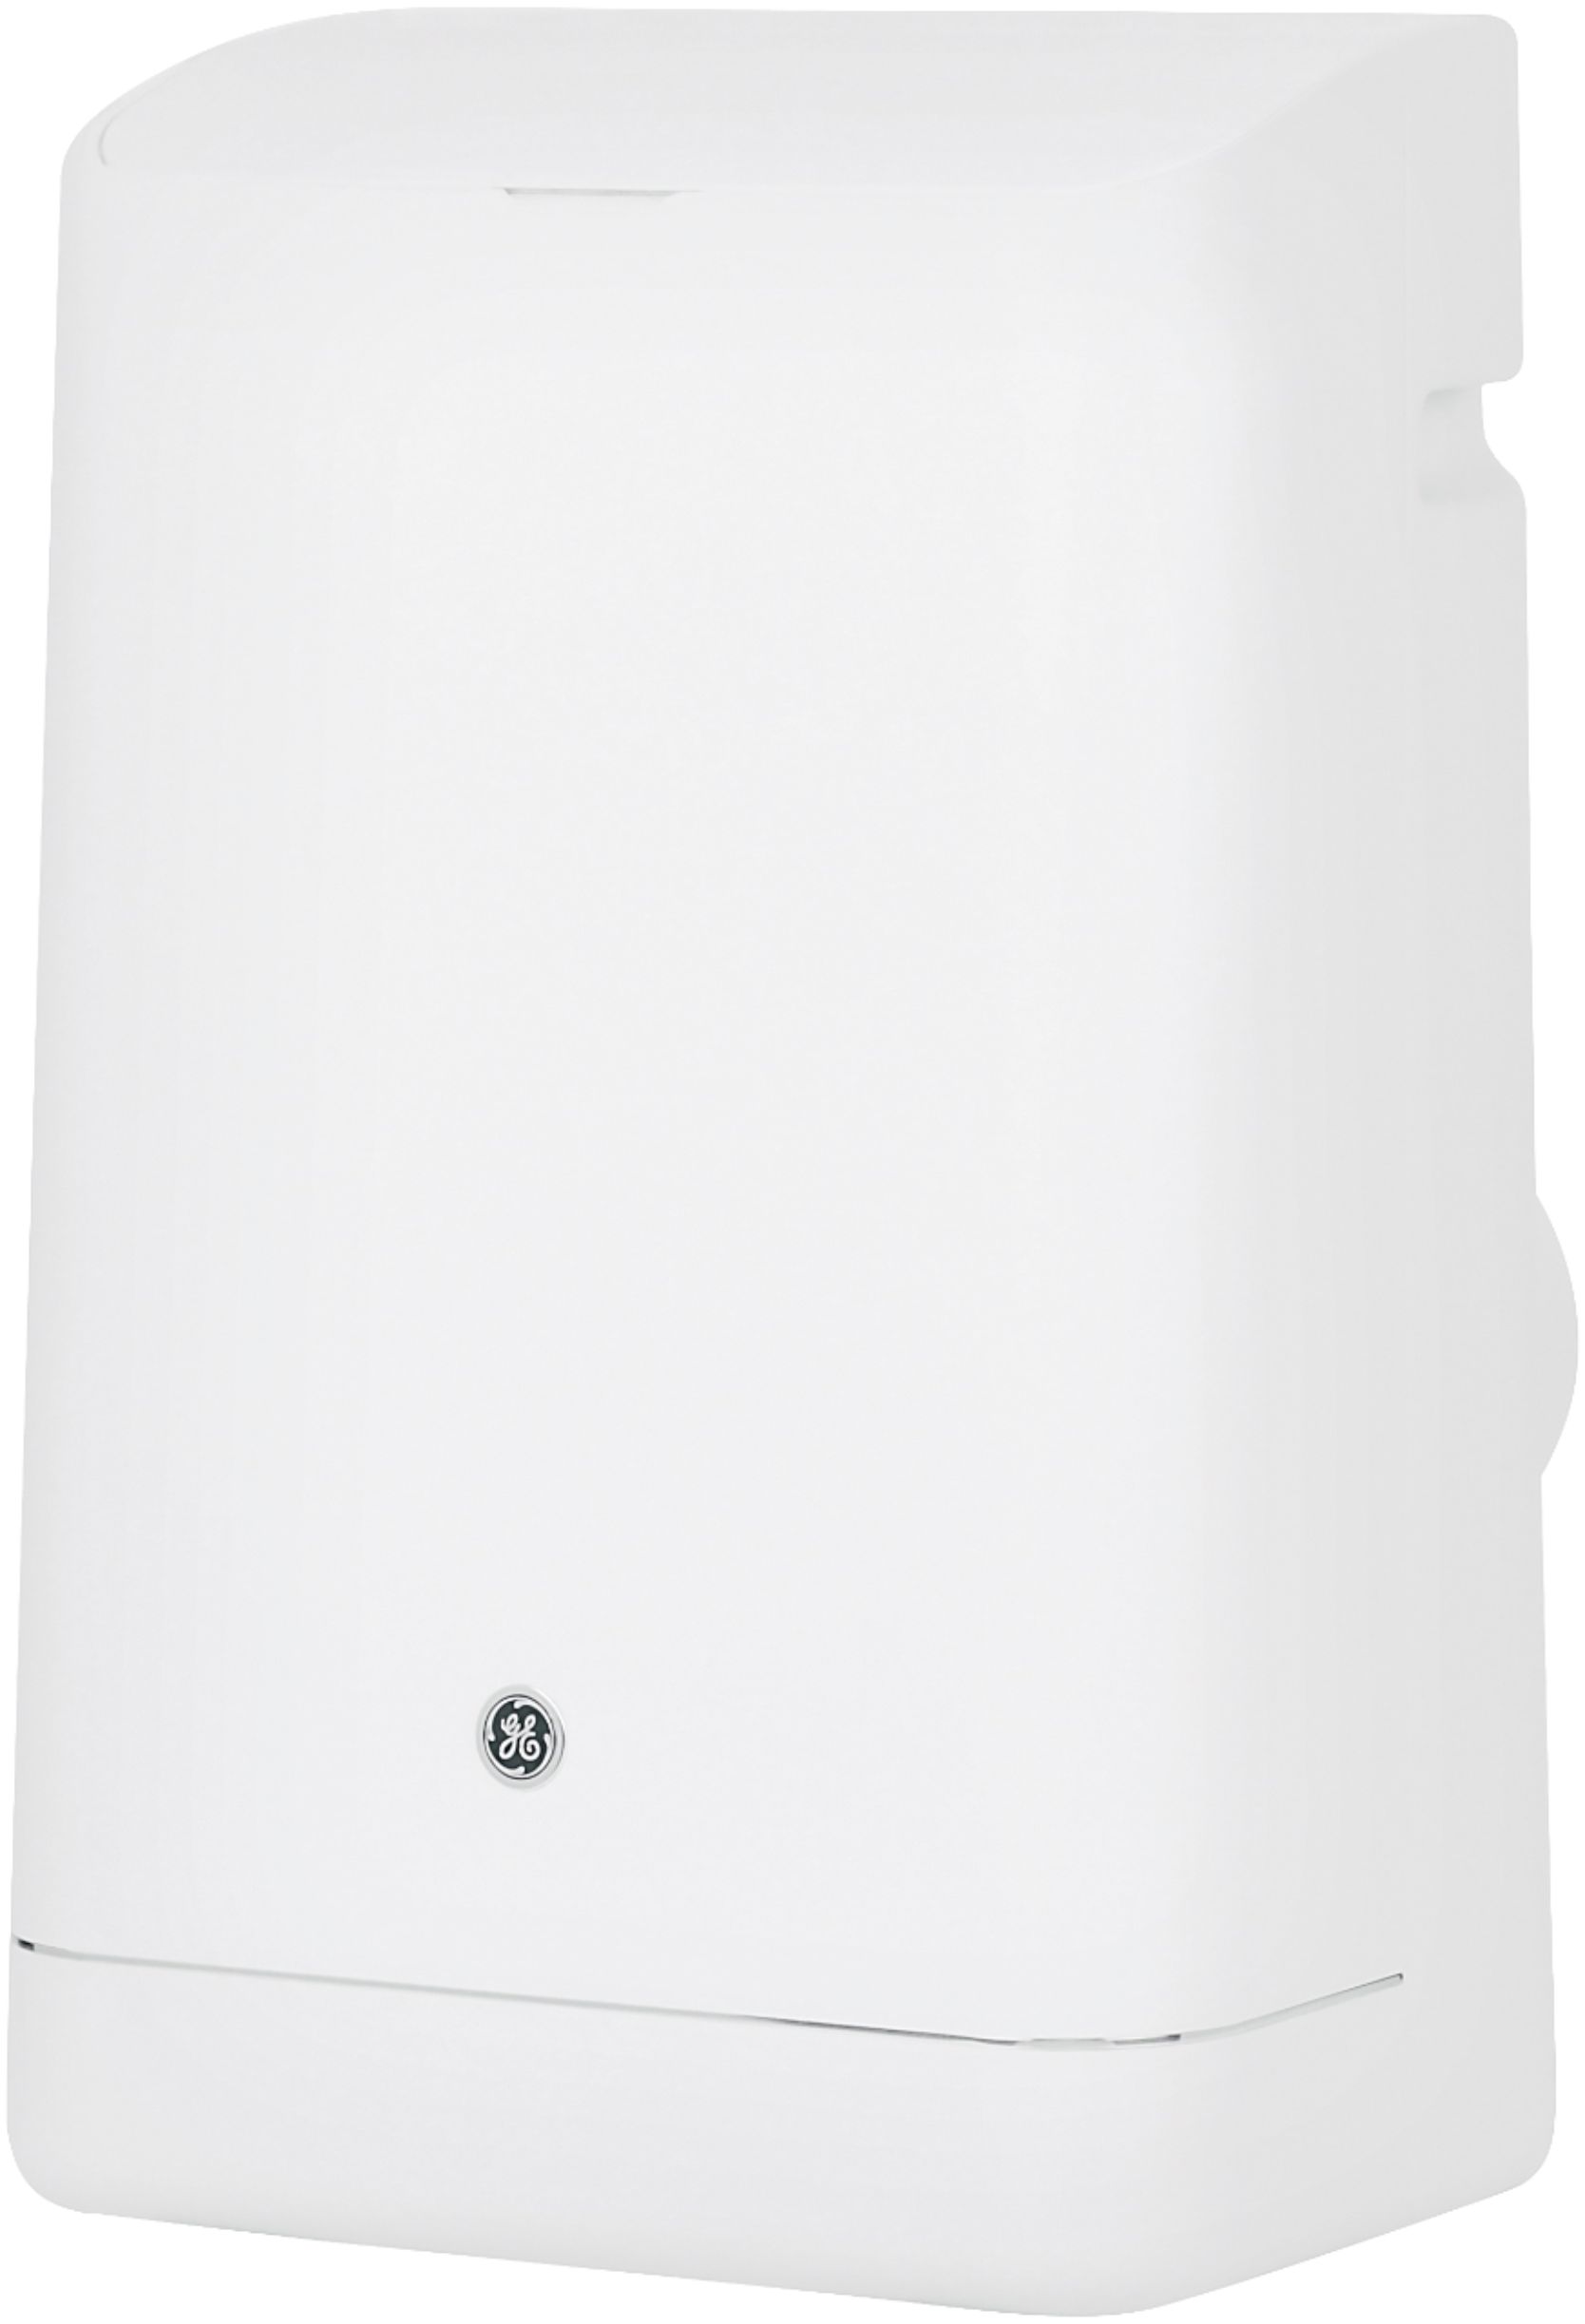 Left View: GE - 350 Sq. Ft. Portable Air Conditioner - White